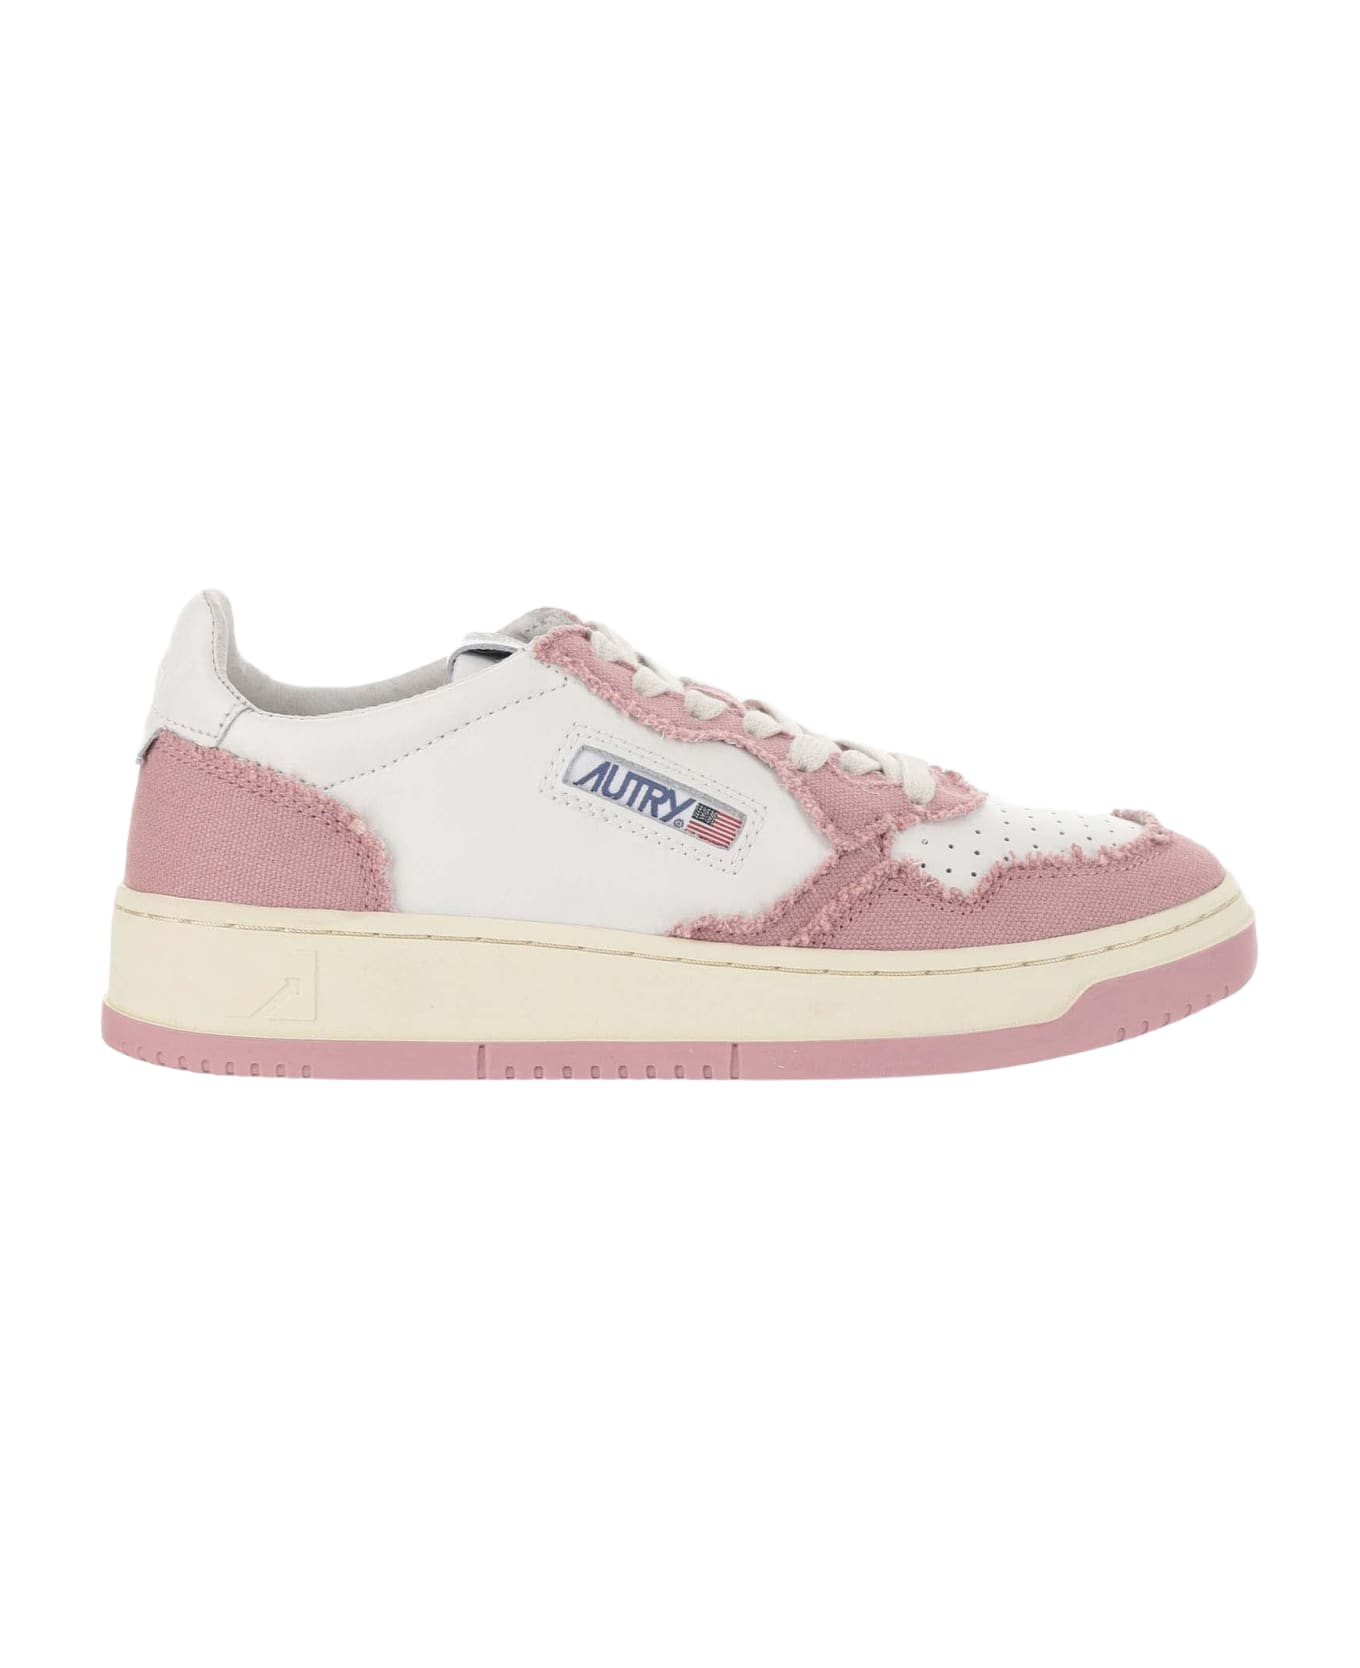 Autry Low Medalist Leather Sneakers - Pink